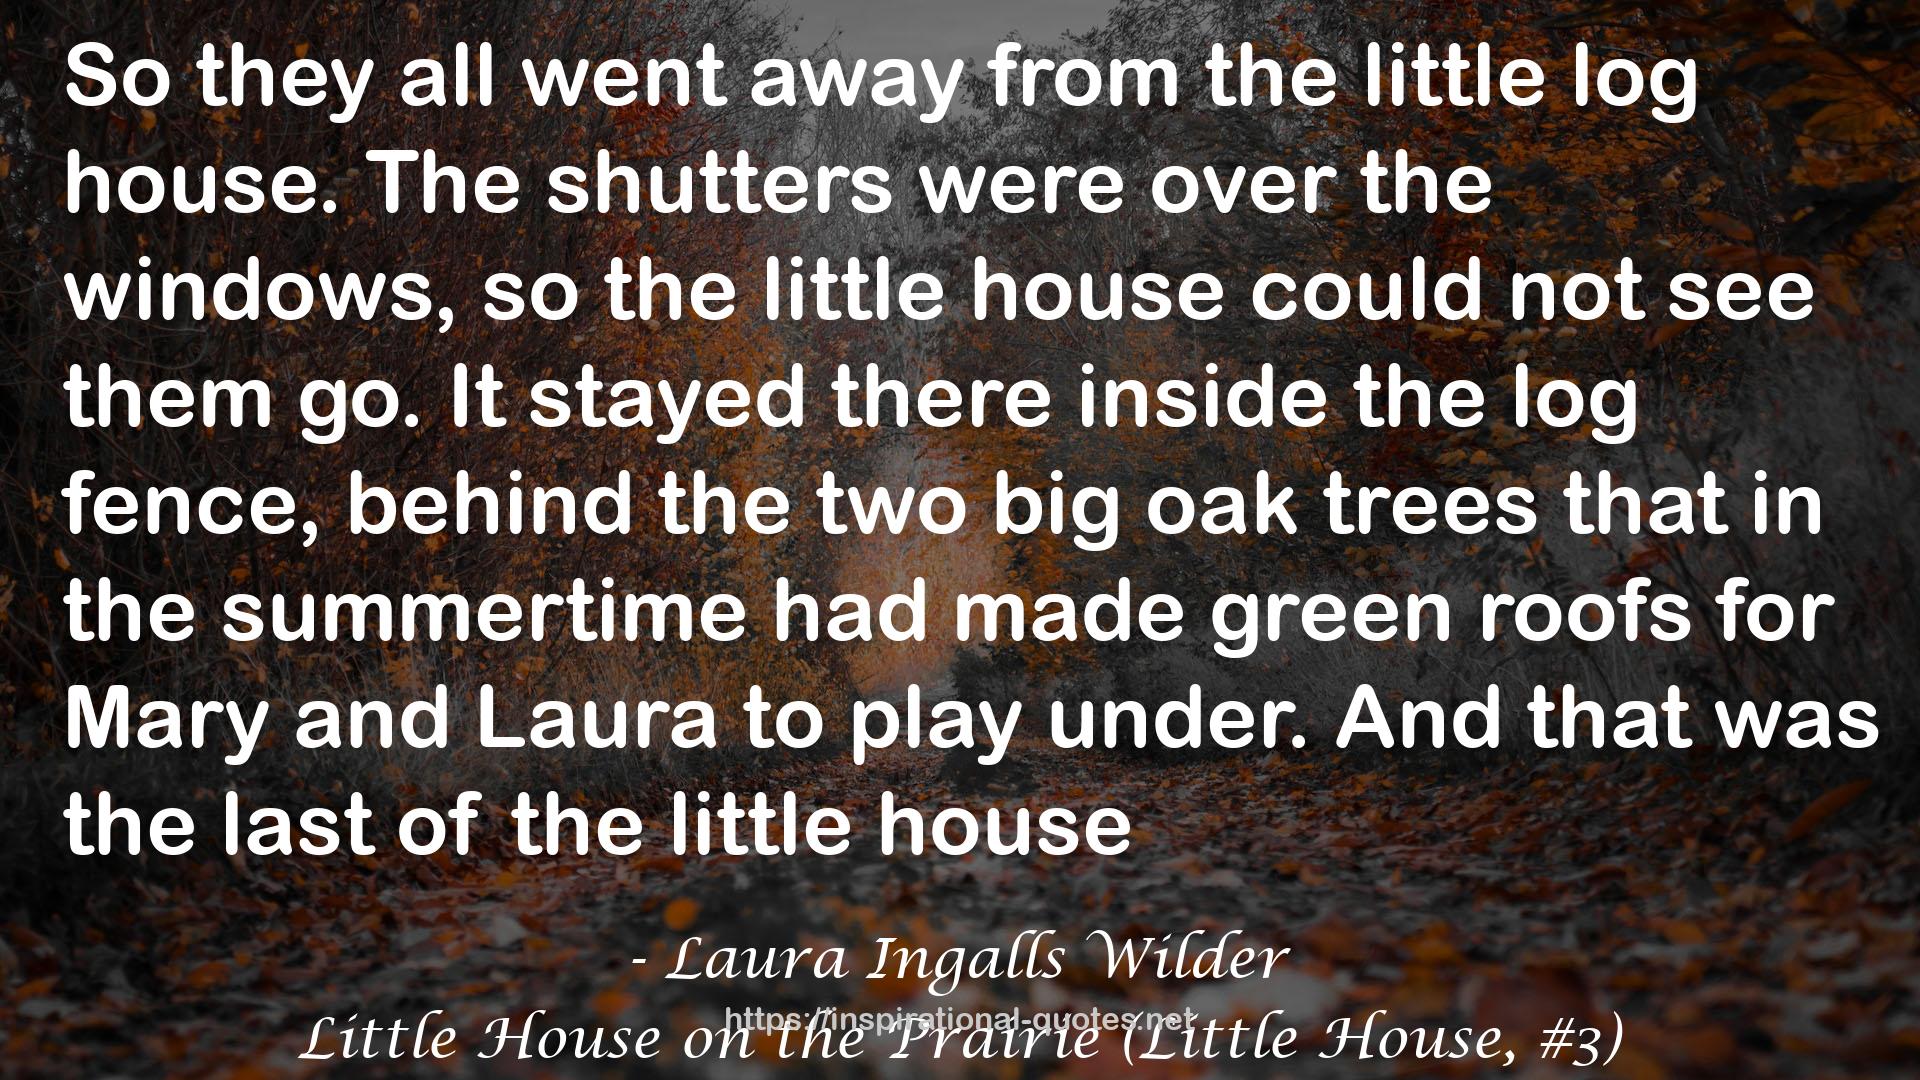 Little House on the Prairie (Little House, #3) QUOTES